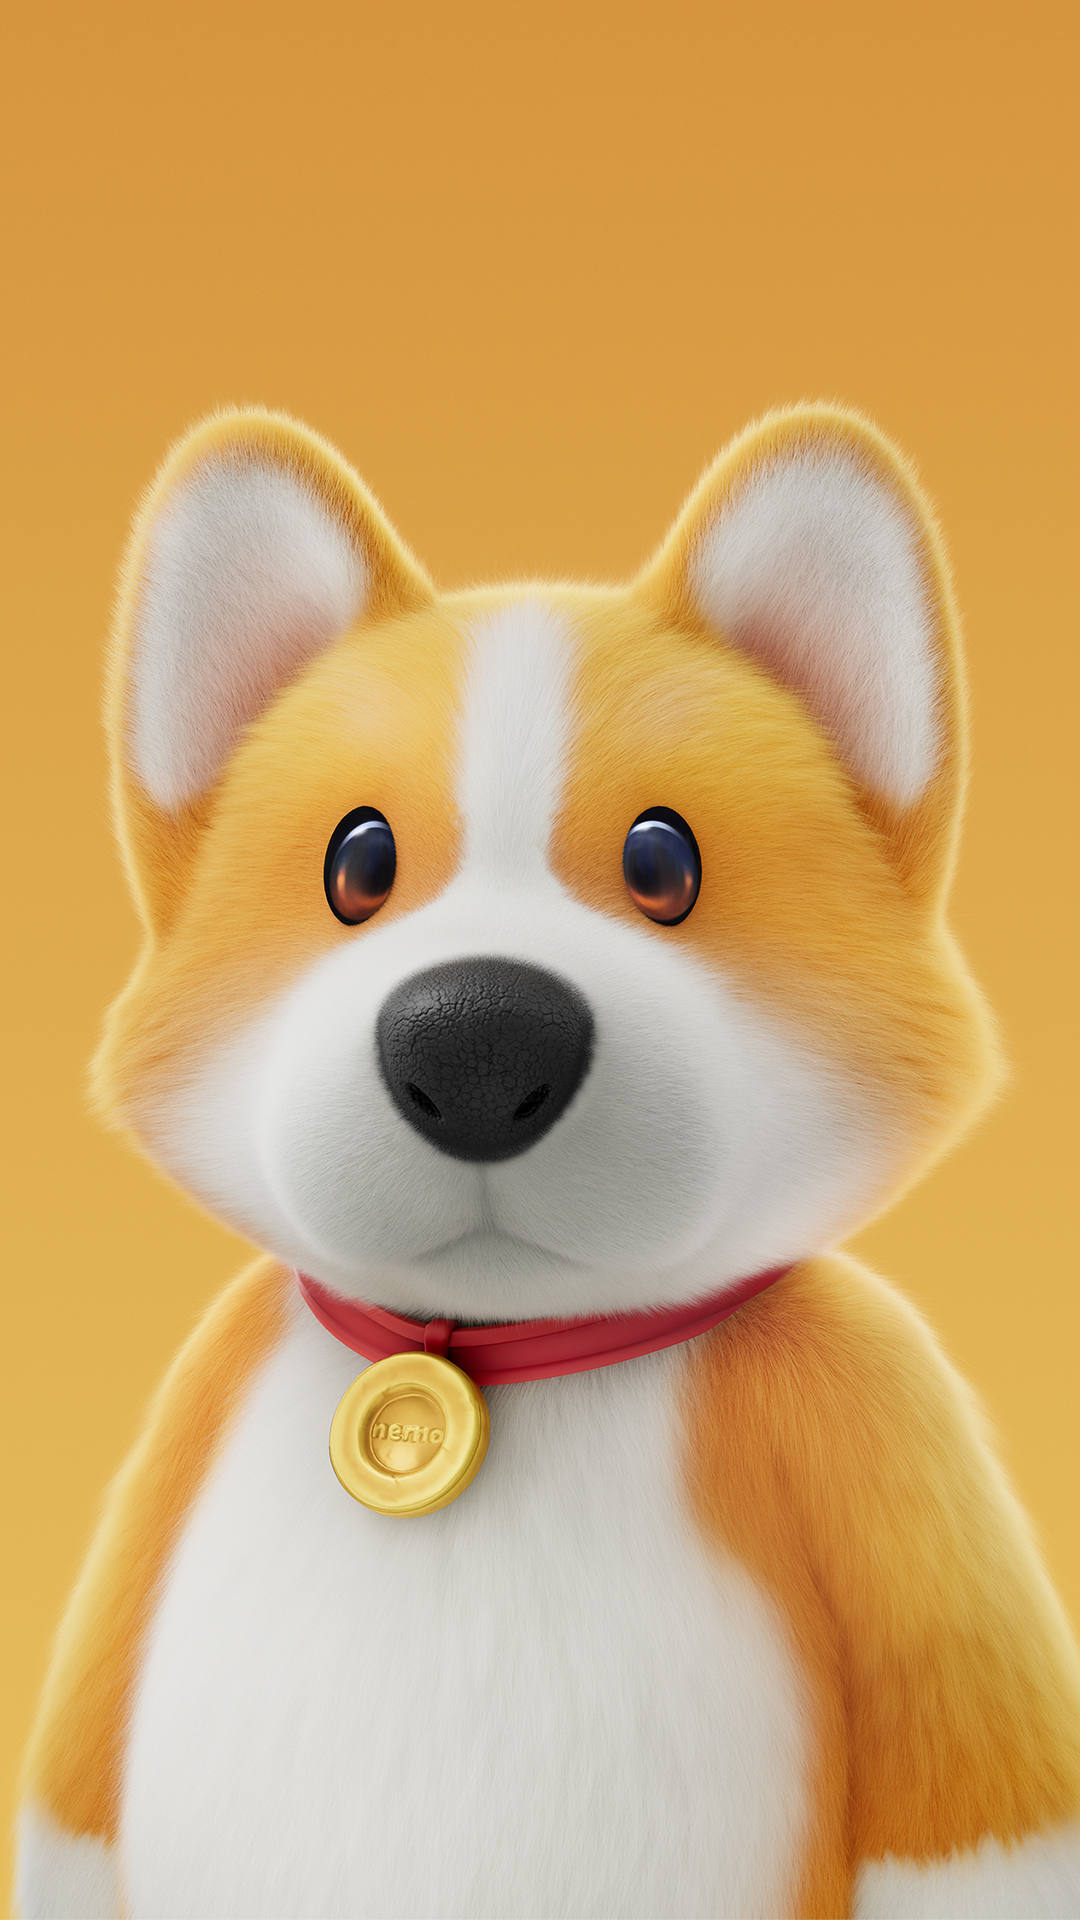 Cute corgi from Party Animals game as a phone wallpaper with a warm orange background.